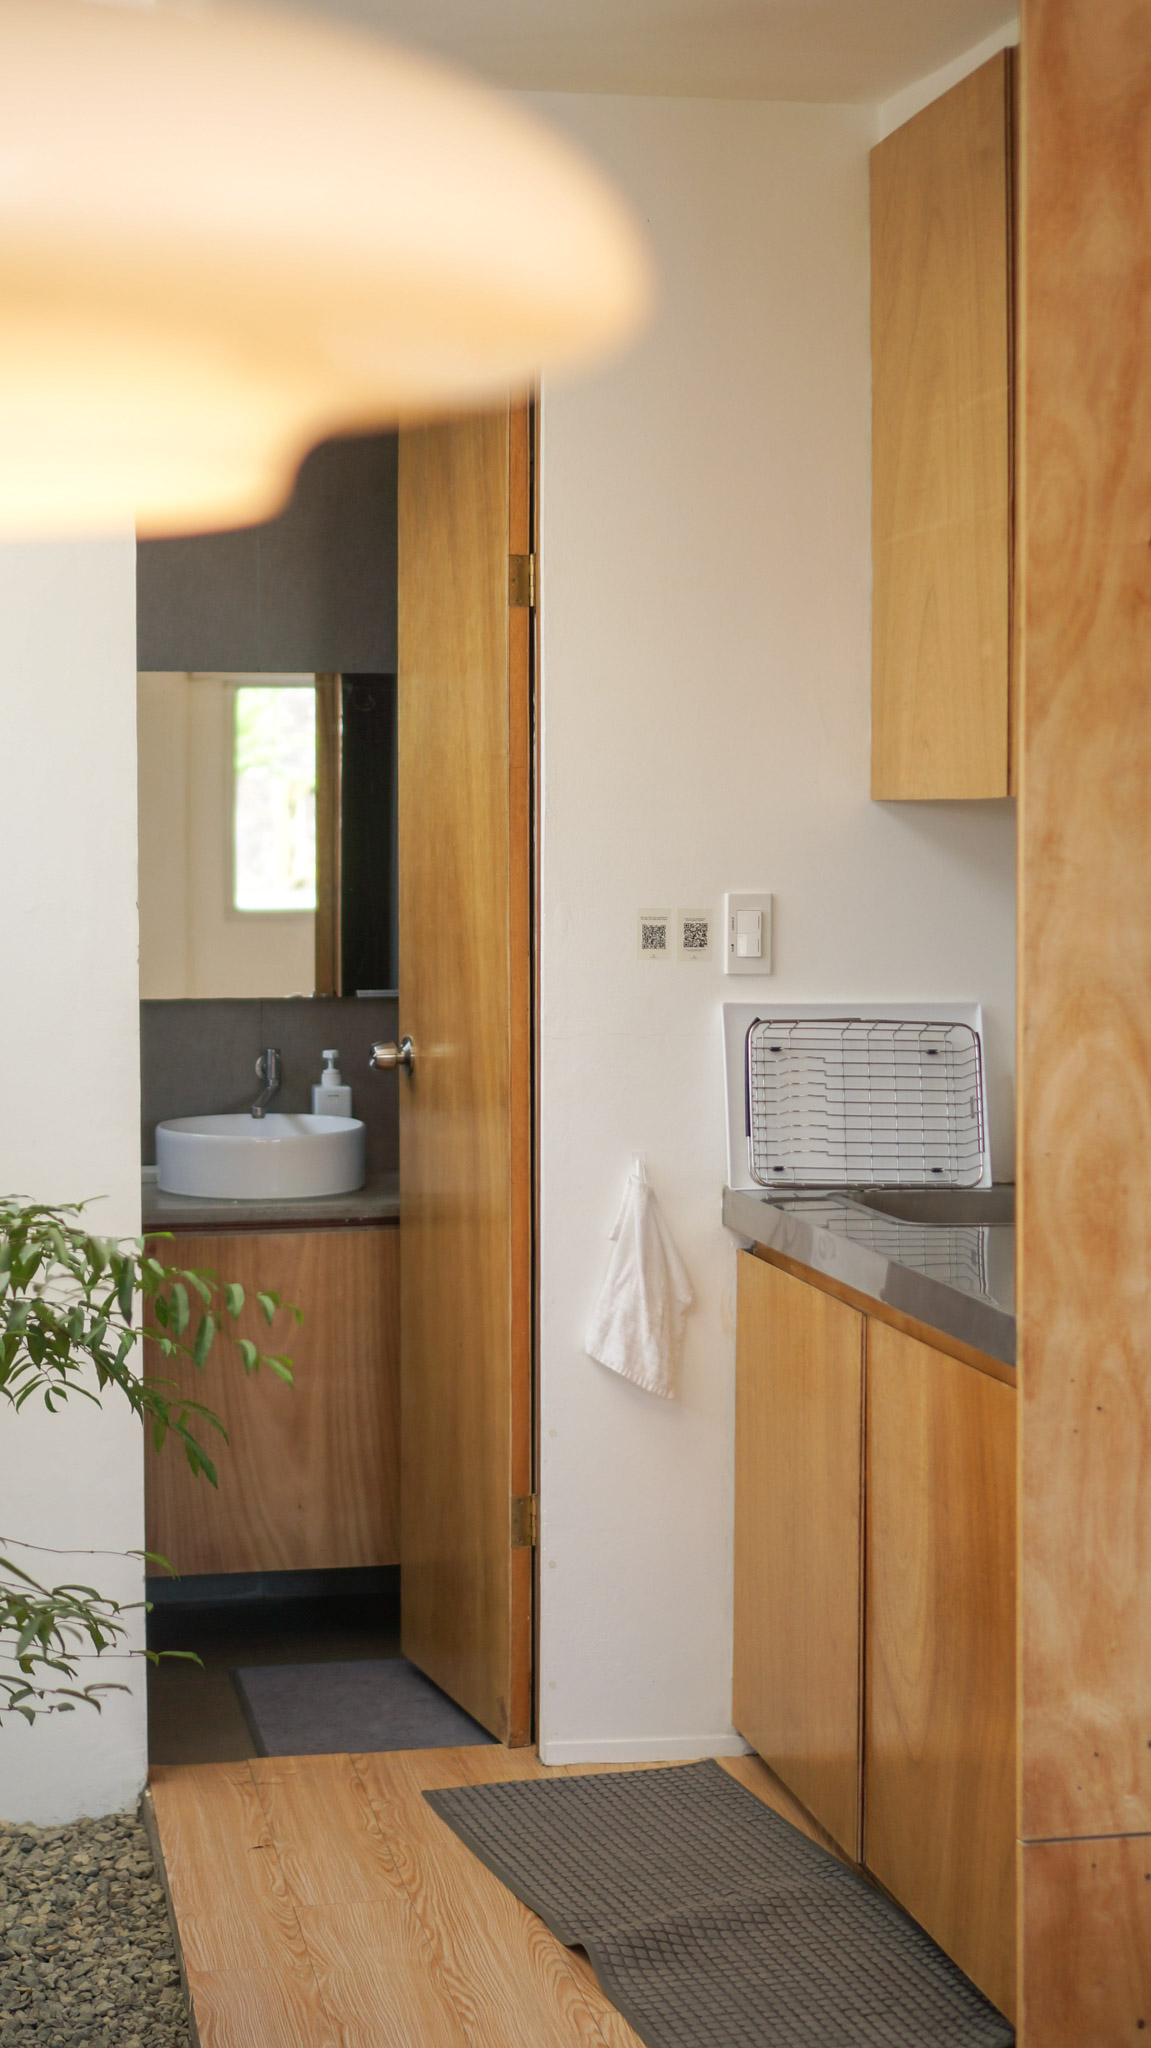 A small kitchenette next to the bathroom door revealing a small sink inside.